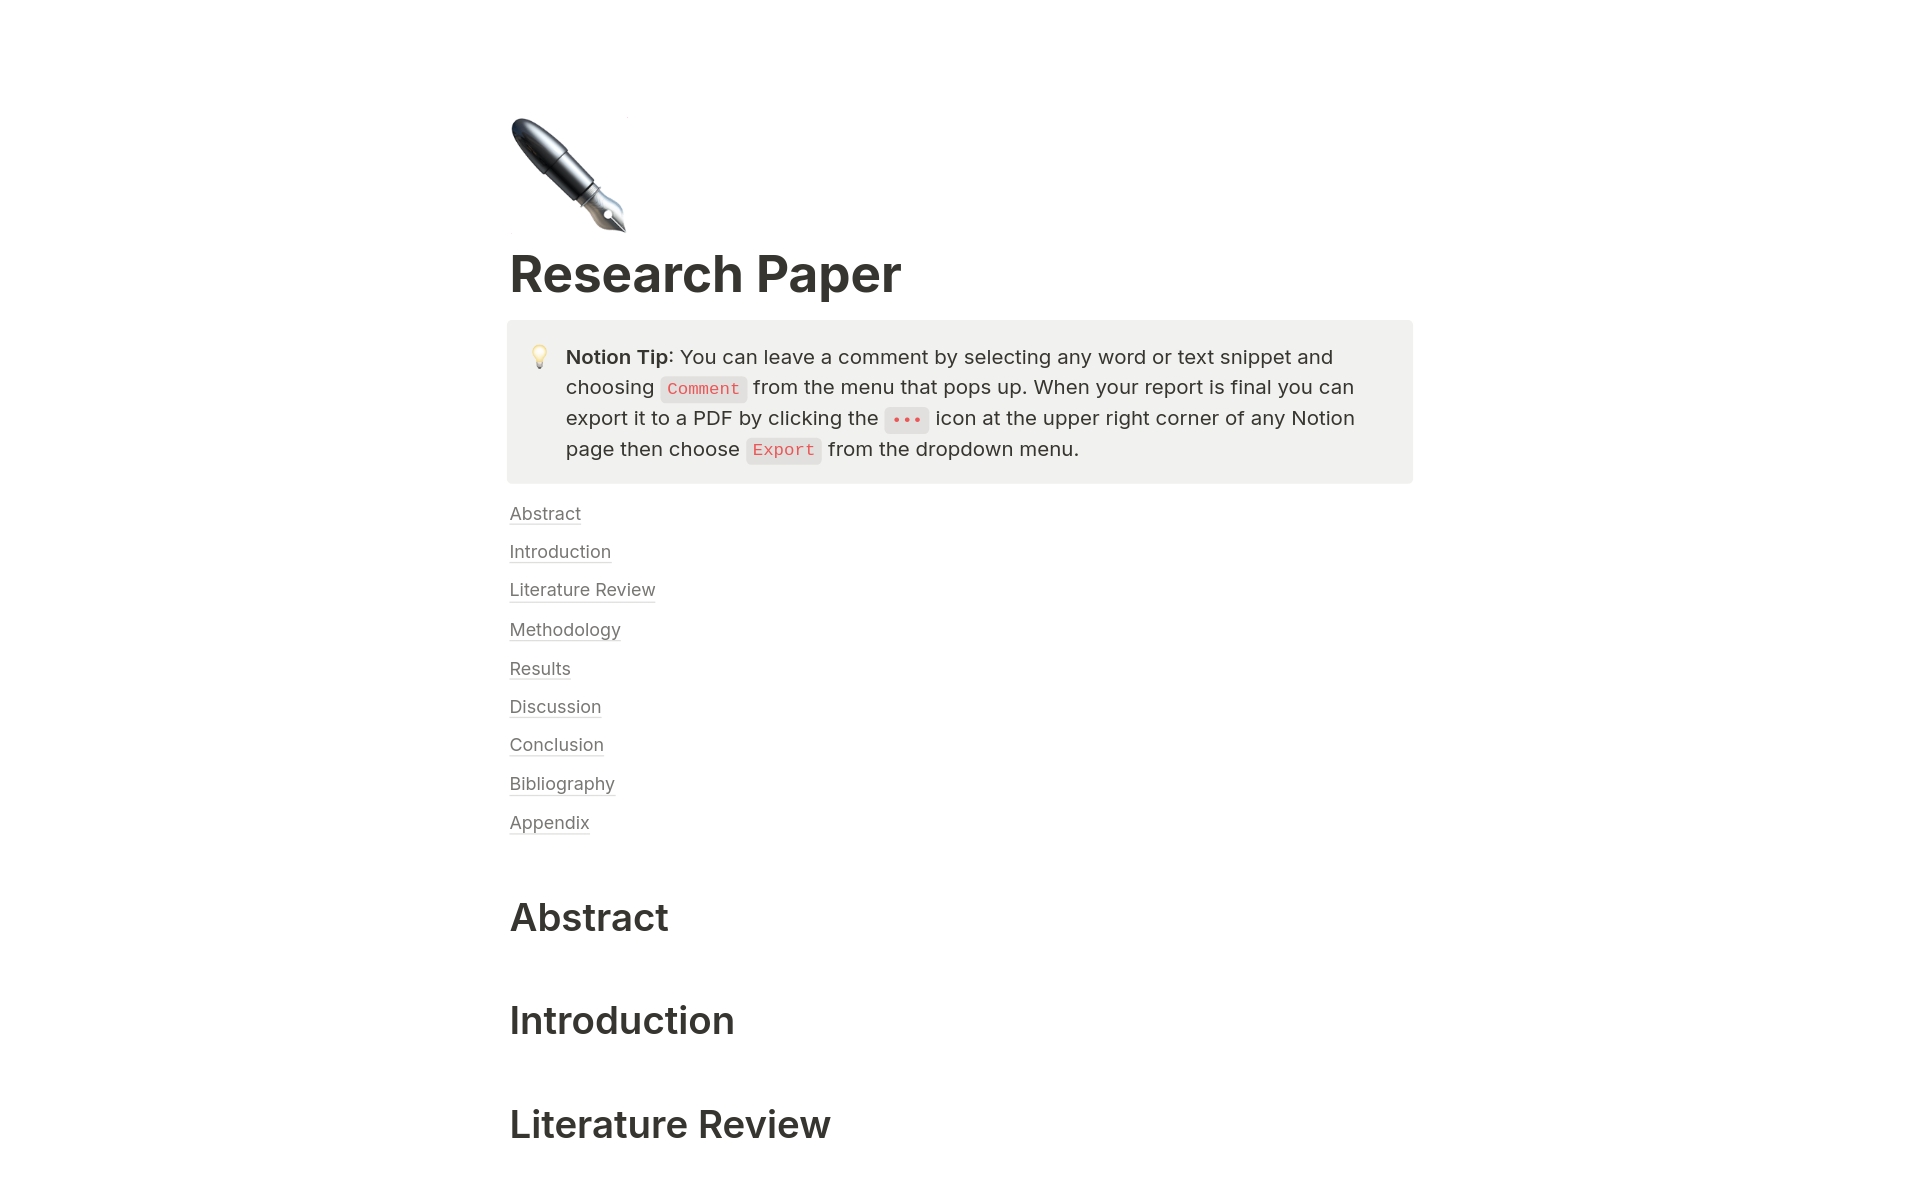 Make this your homepage for planning and writing a research paper or dissertation.